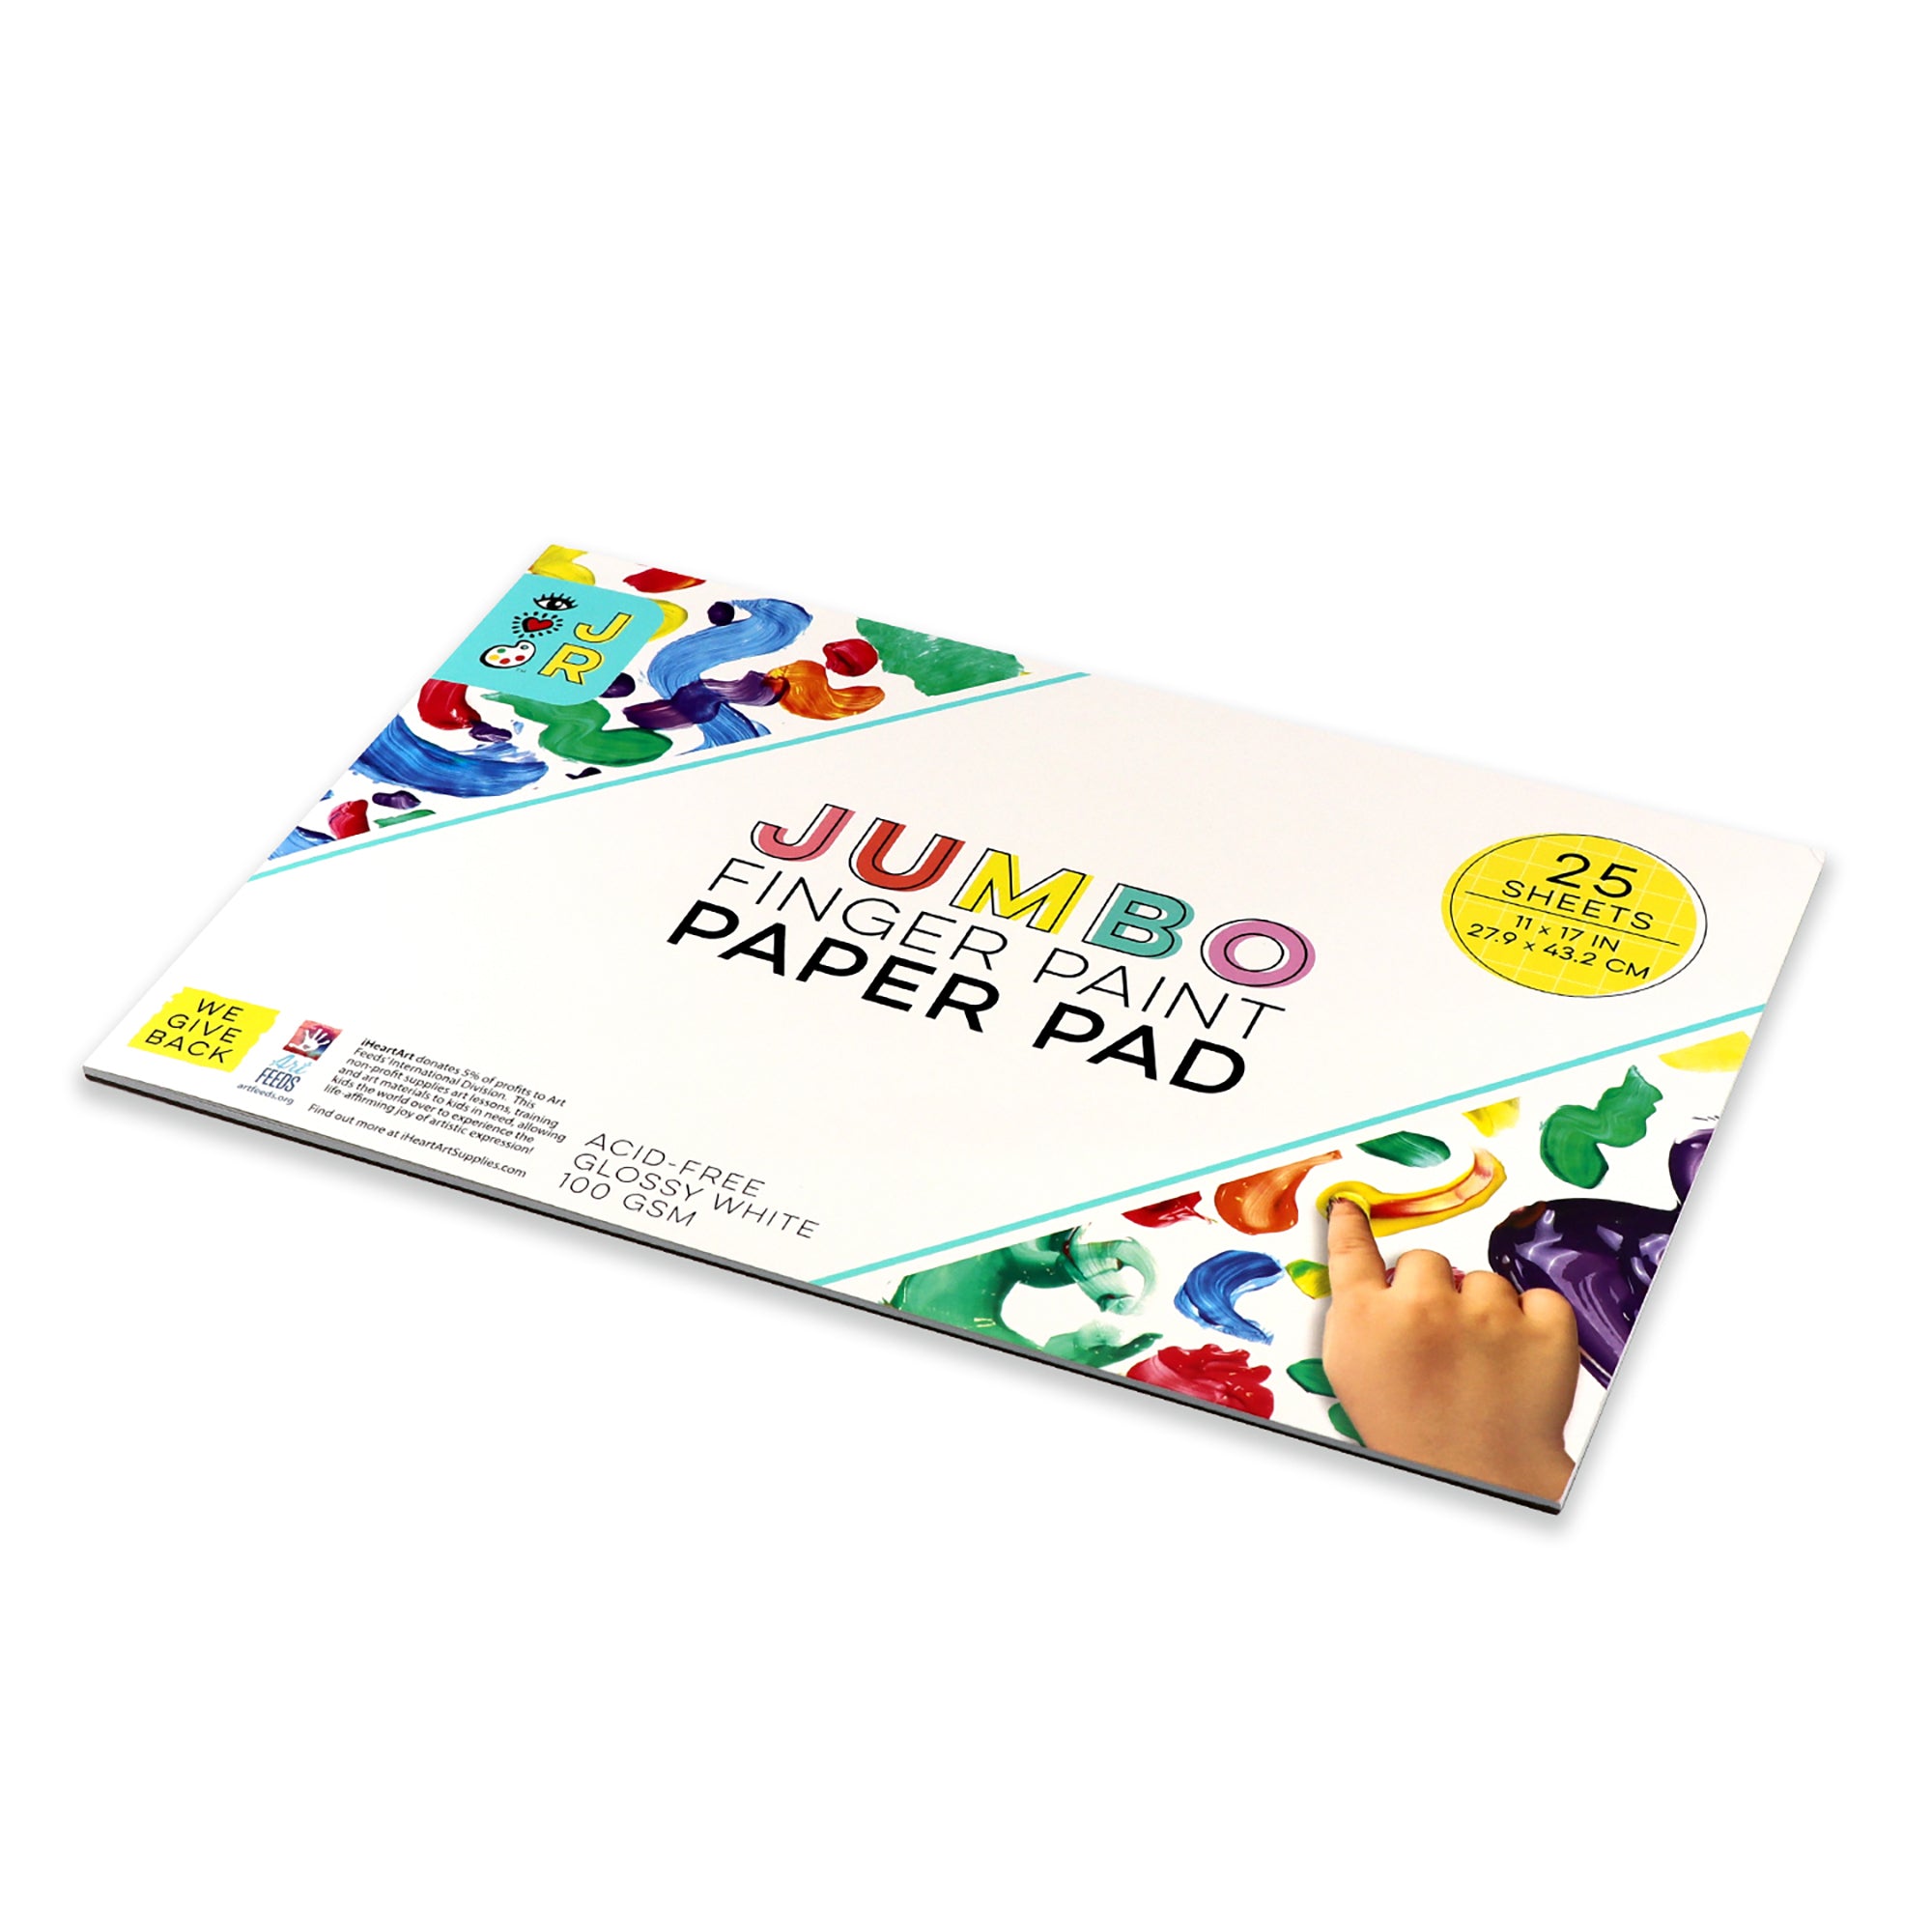 Large 11 x 17 Finger Painting Paper Pad - 25 Sheets 60lb (100gsm) Acid  Free (Pack of 2 Pads)